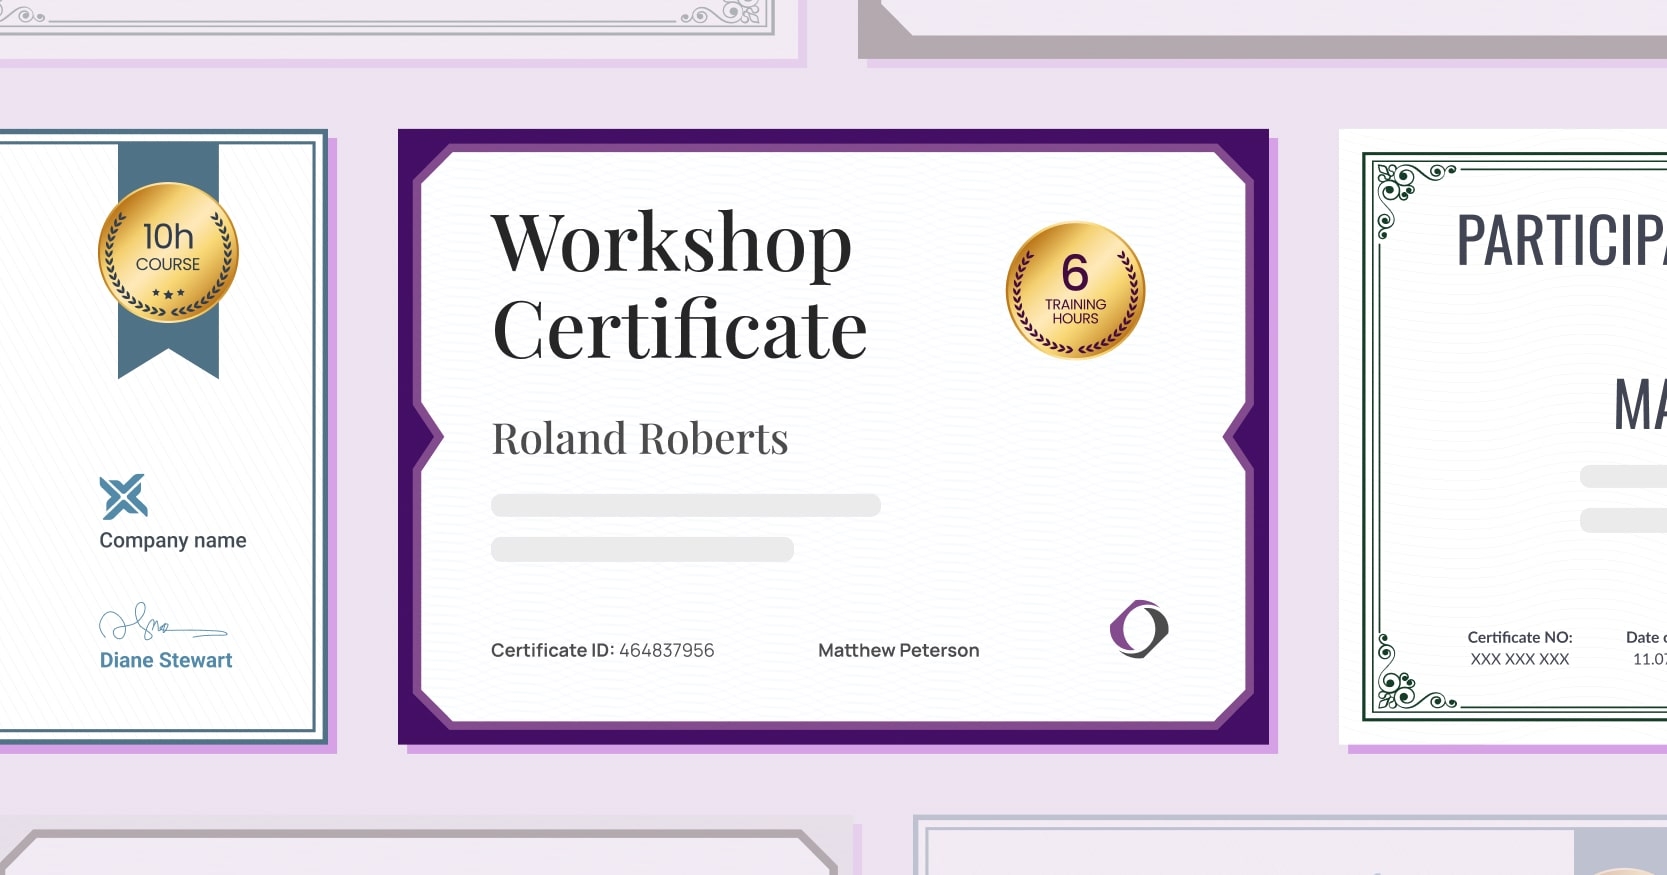 15 Workshop Certificate Templates to Download cover image